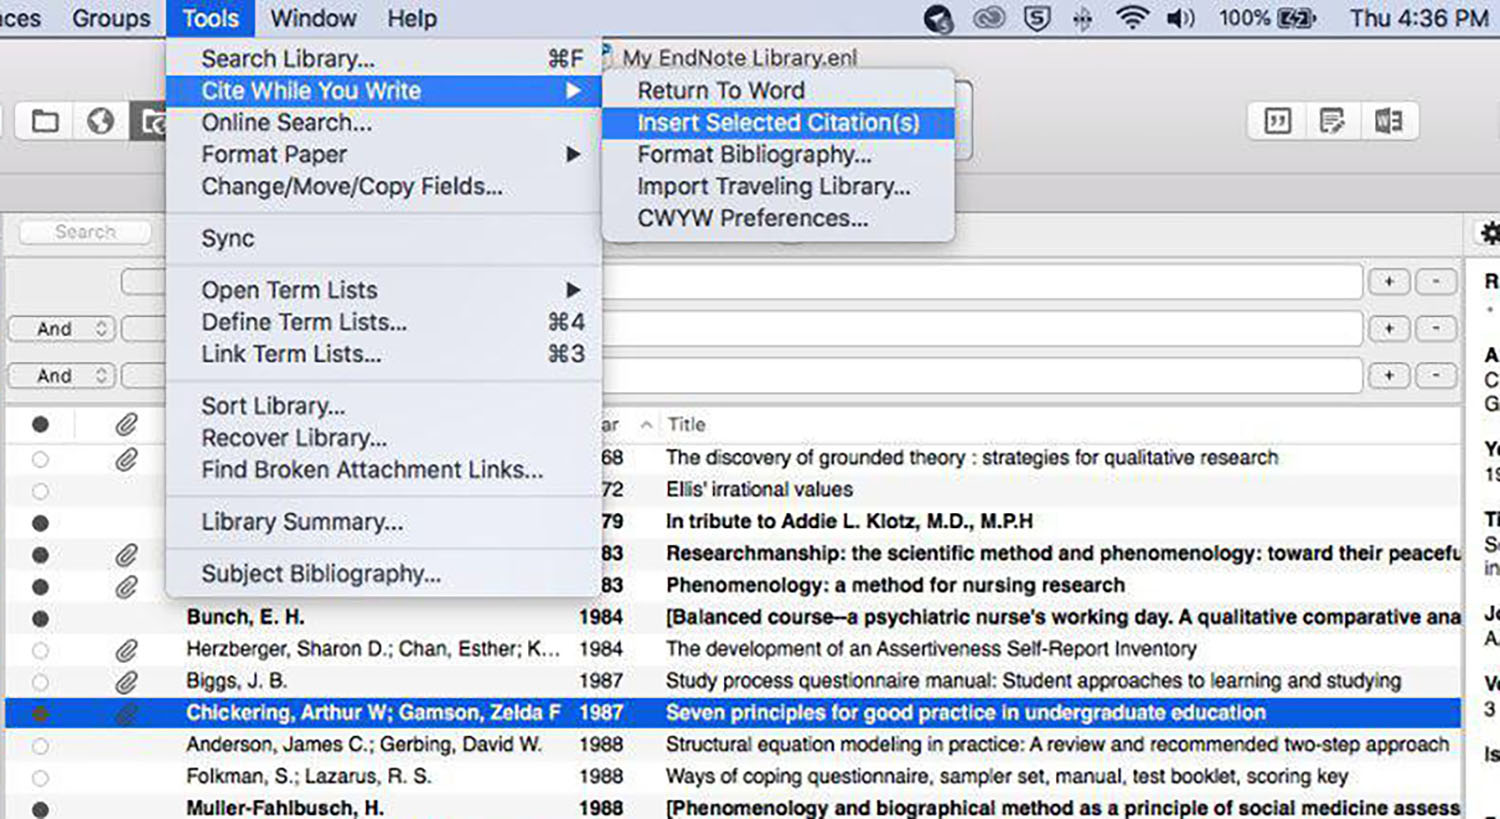 format different document citations in endnote